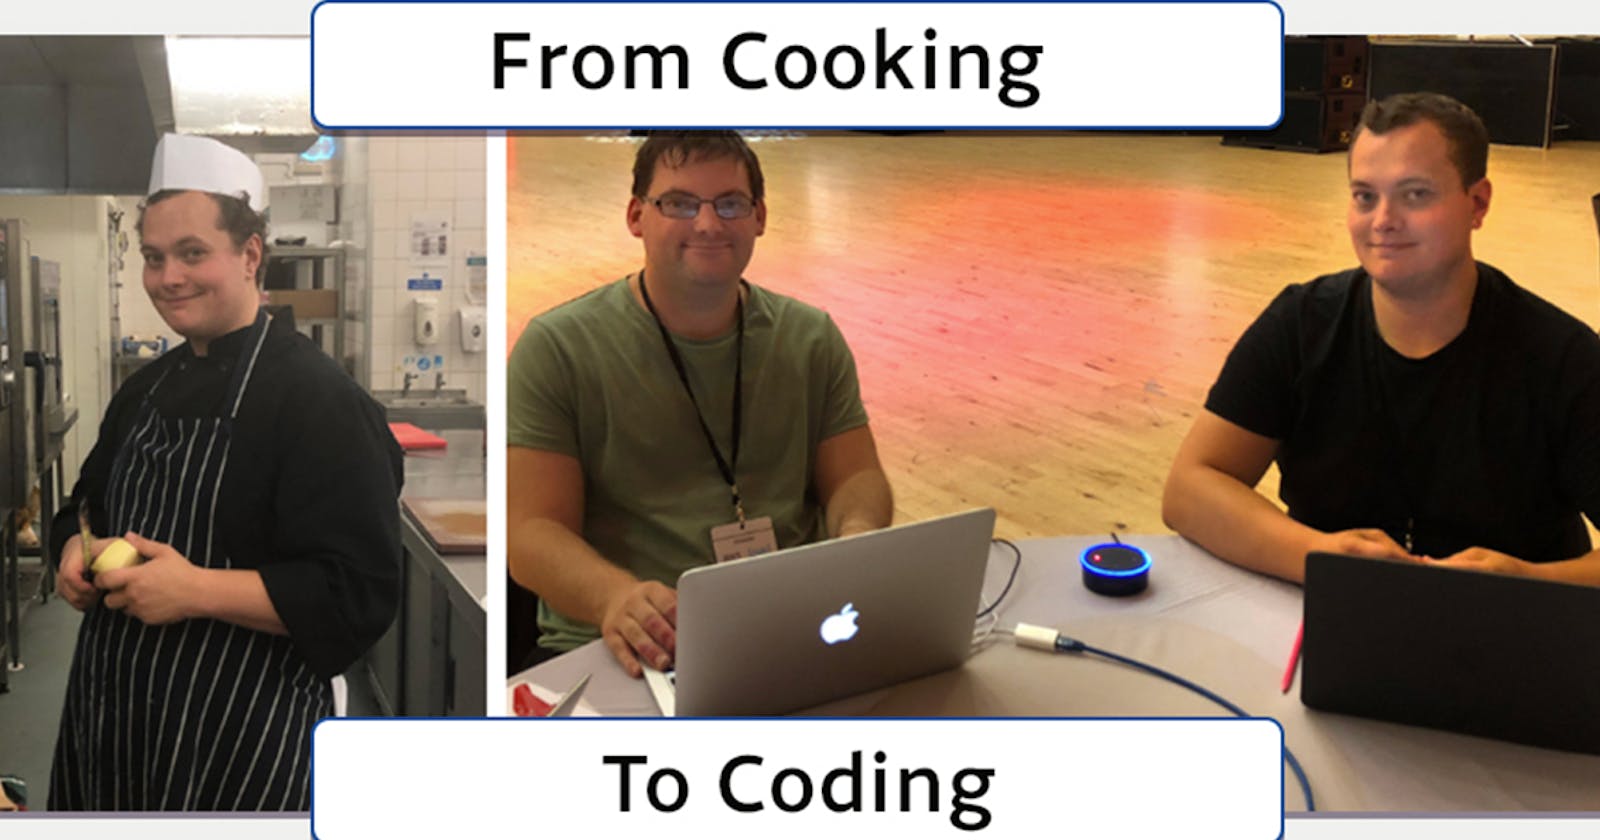 From Cooking to Coding